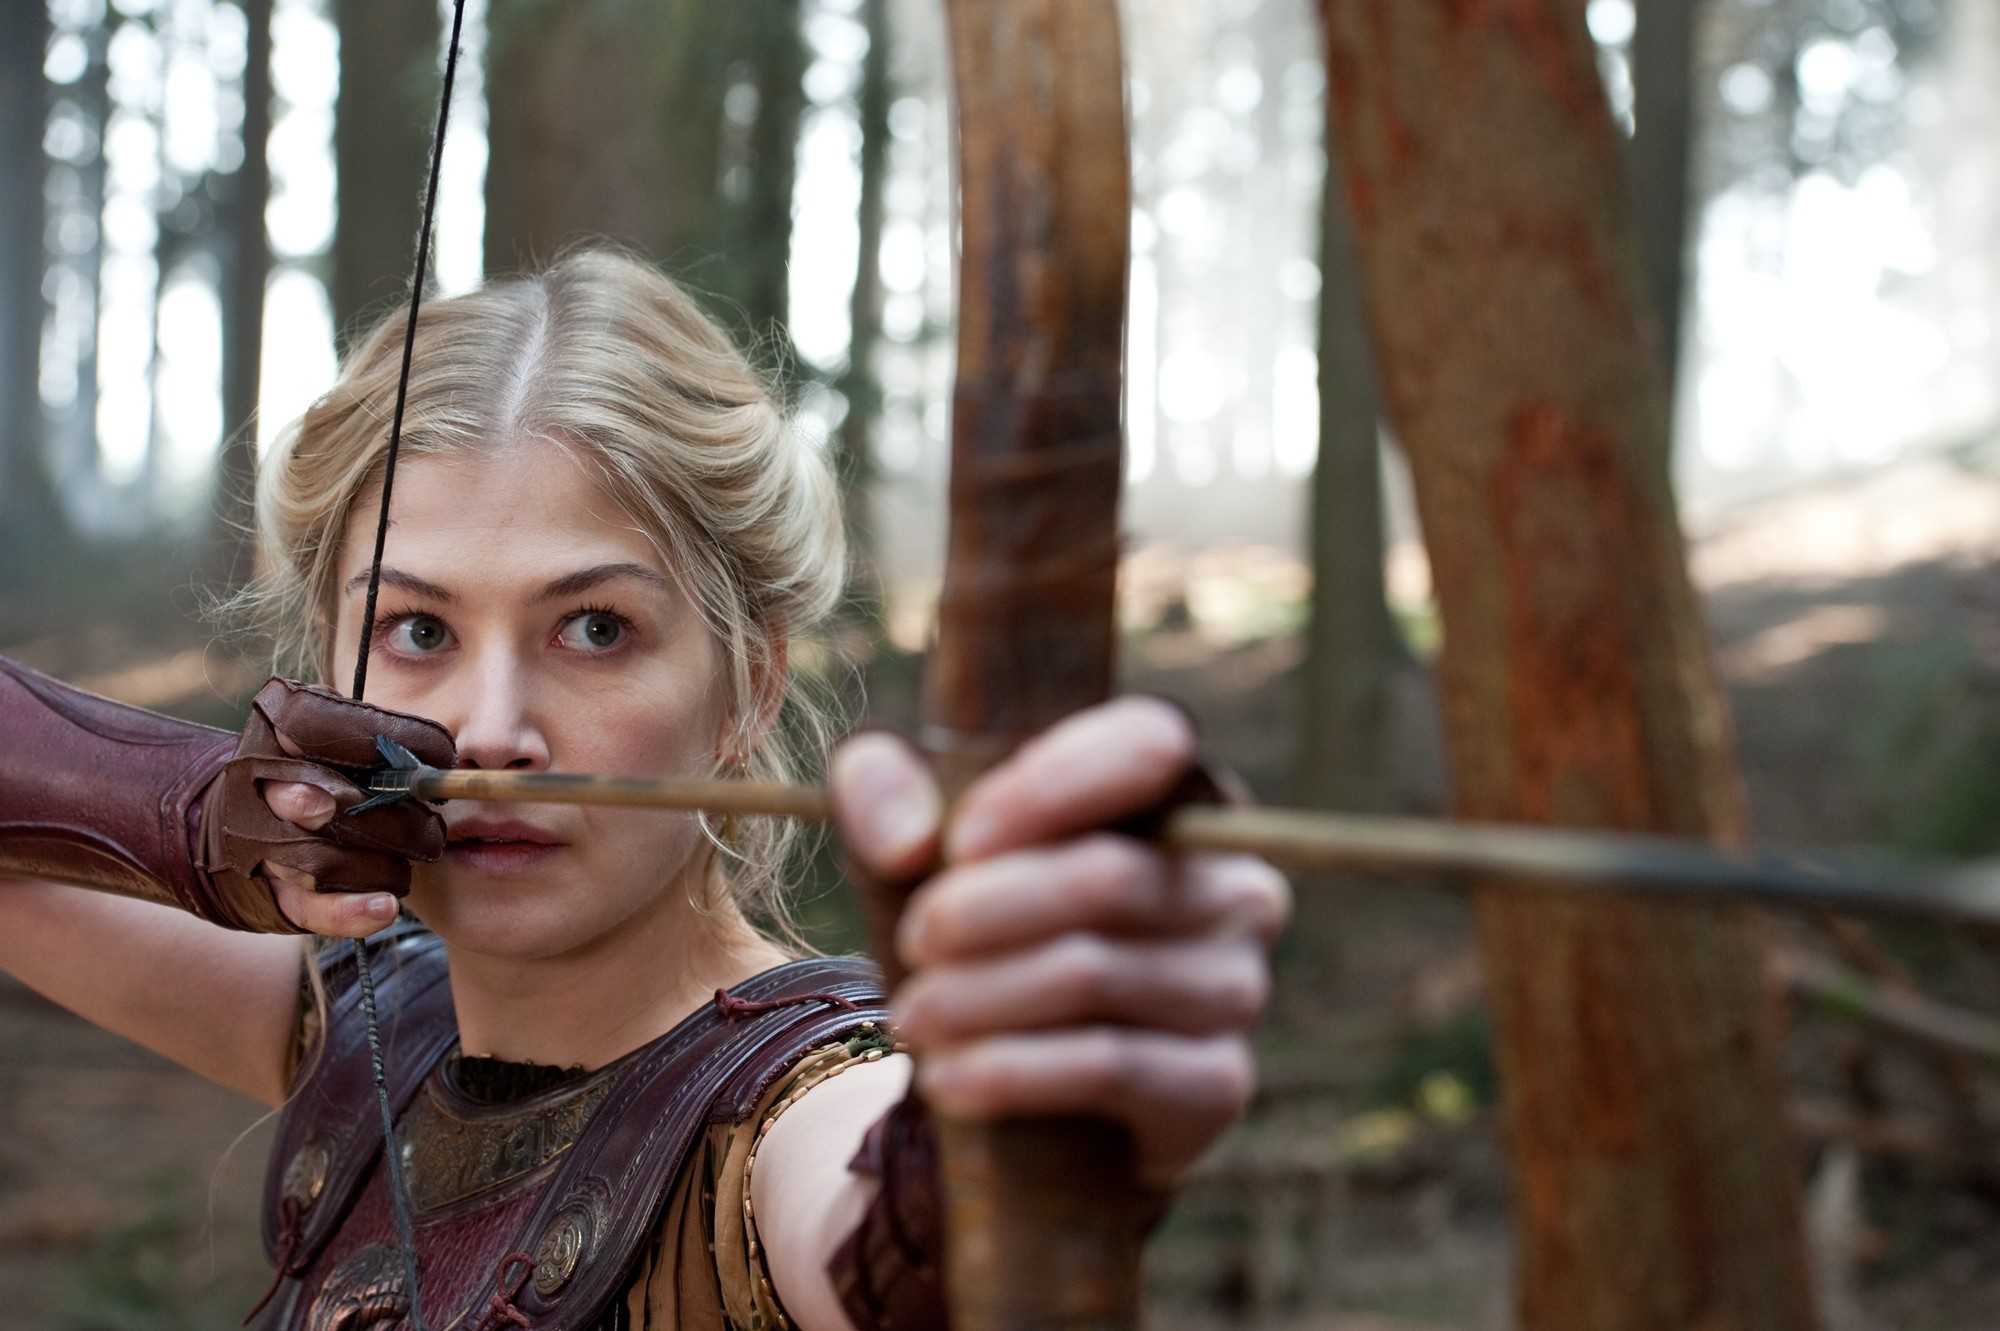 Rosamund Pike stars as Andromeda in Warner Bros. Pictures' Wrath of the Titans (2012). Photo credit by Jay Maidment.